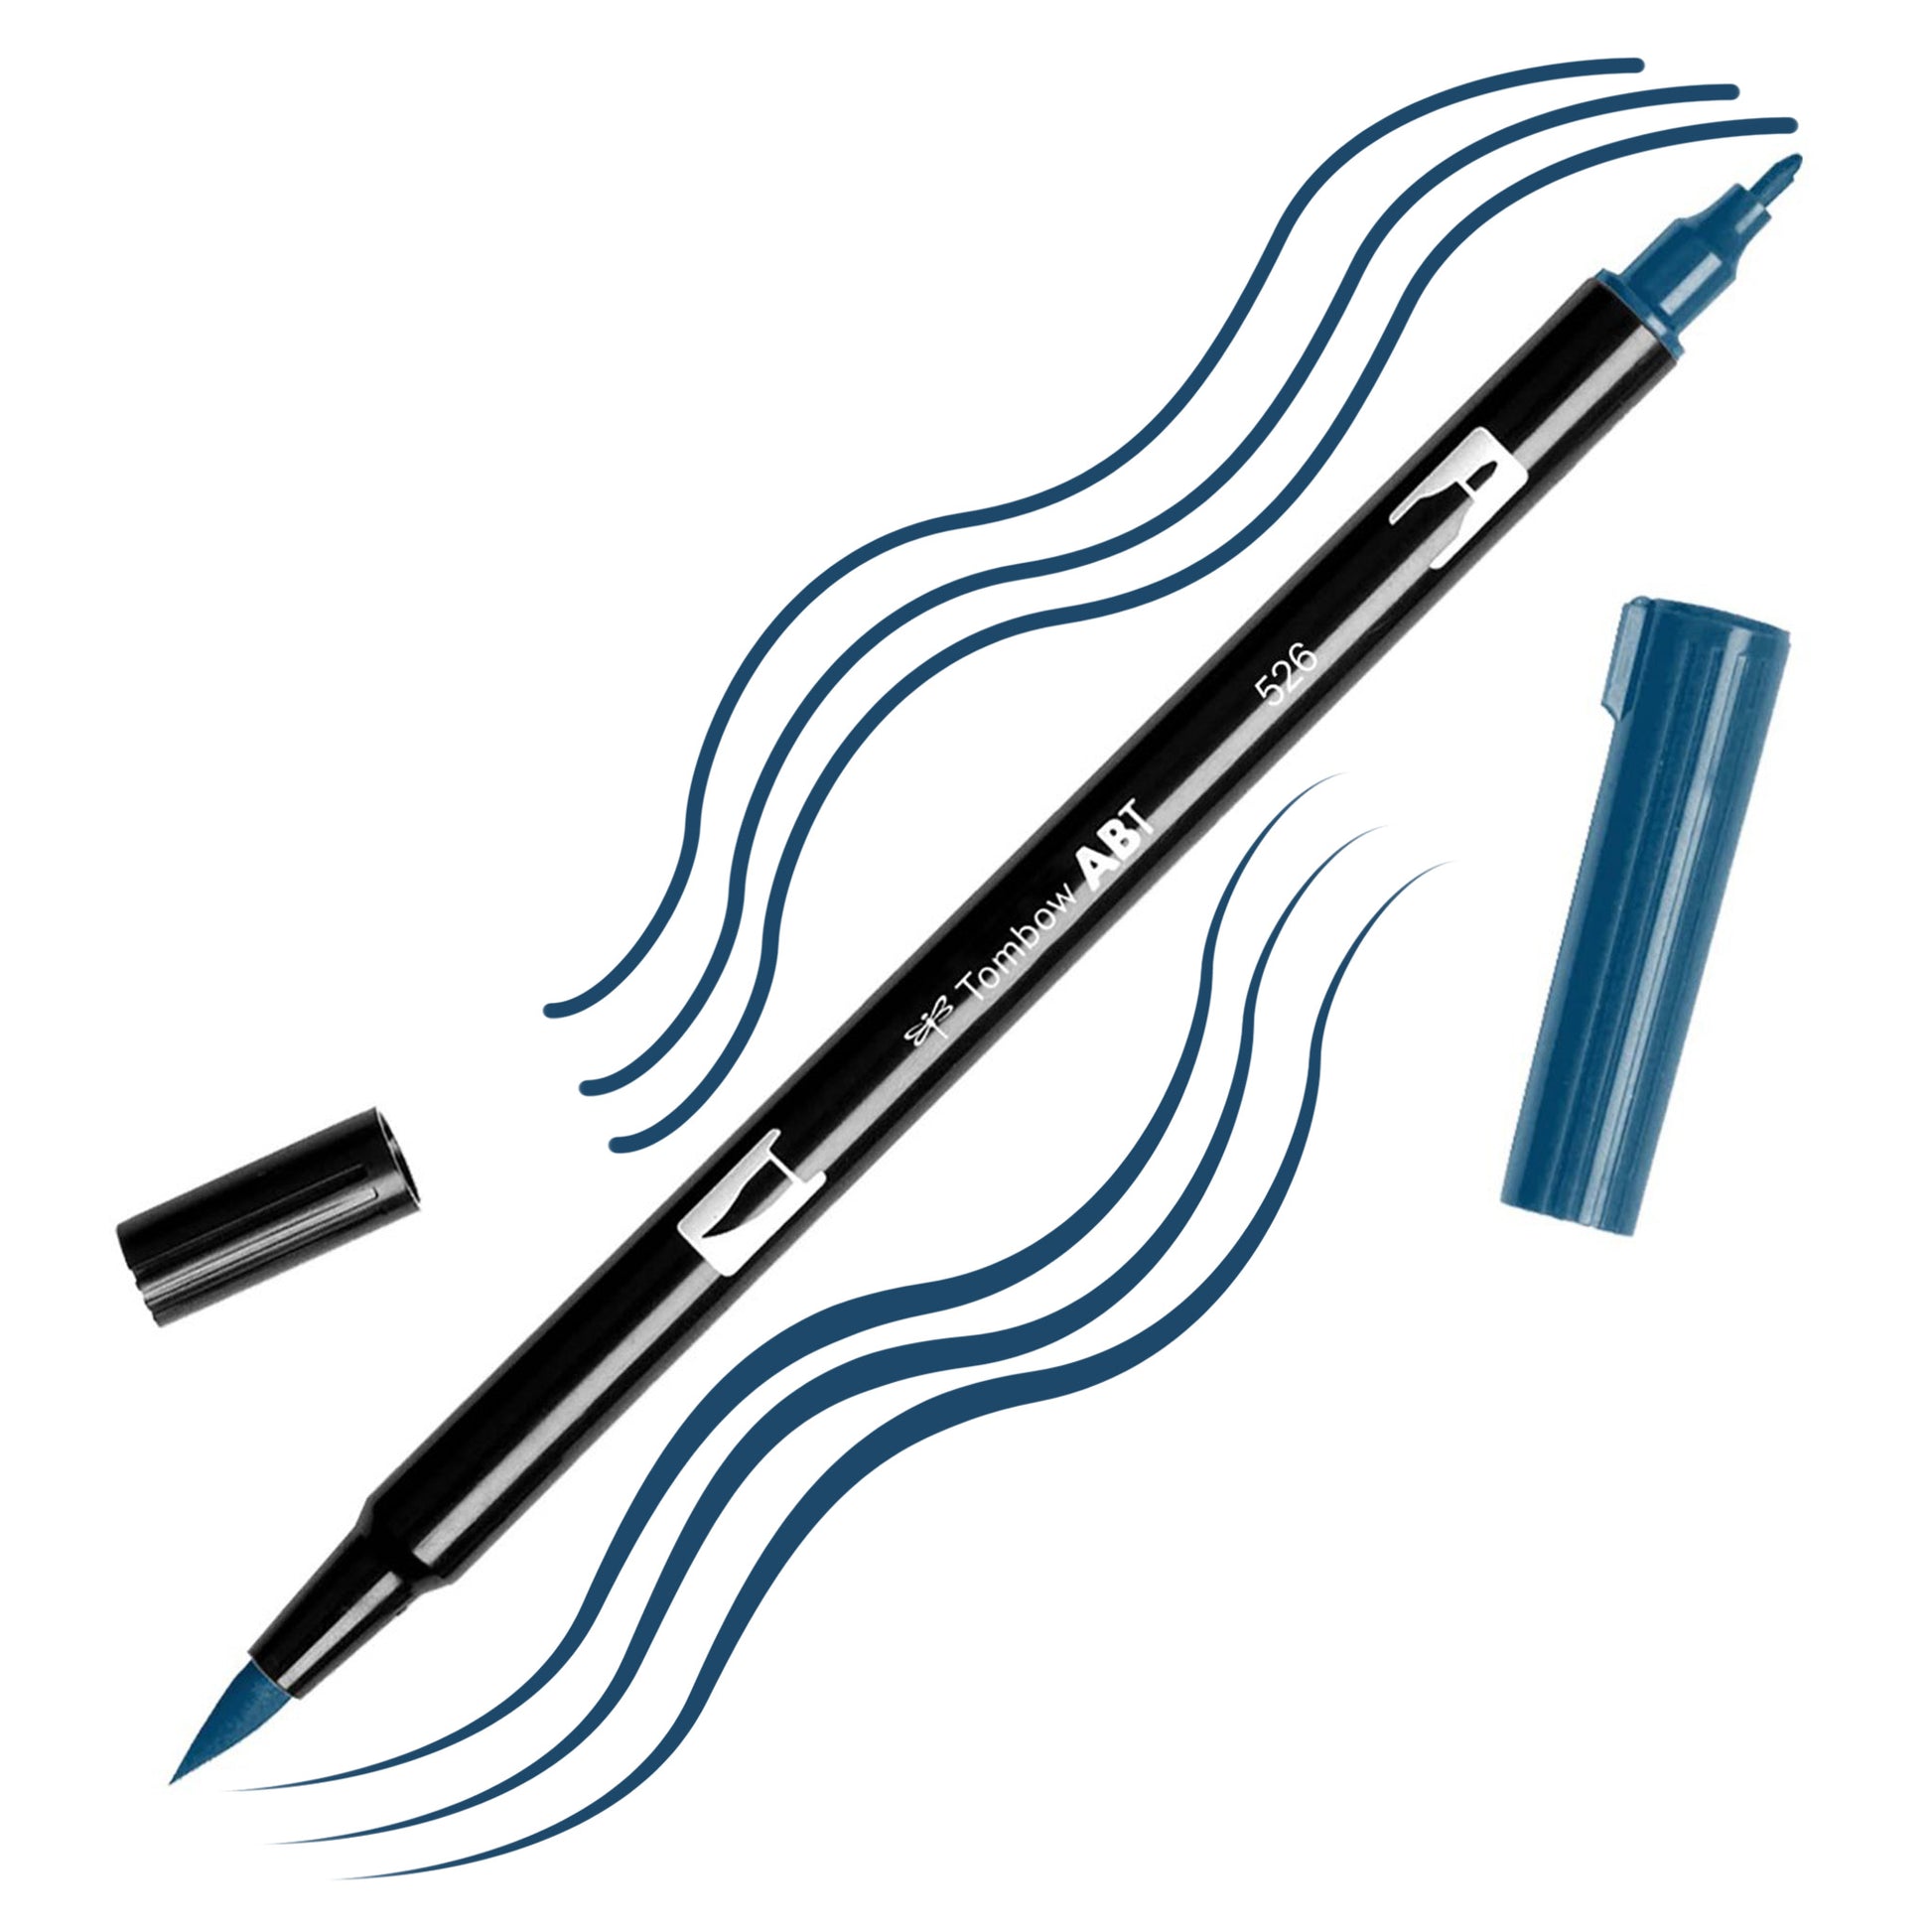 True Blue Tombow double-headed brush-pen with a flexible nylon fiber brush tip and a fine tip against a white background with True Blue strokes